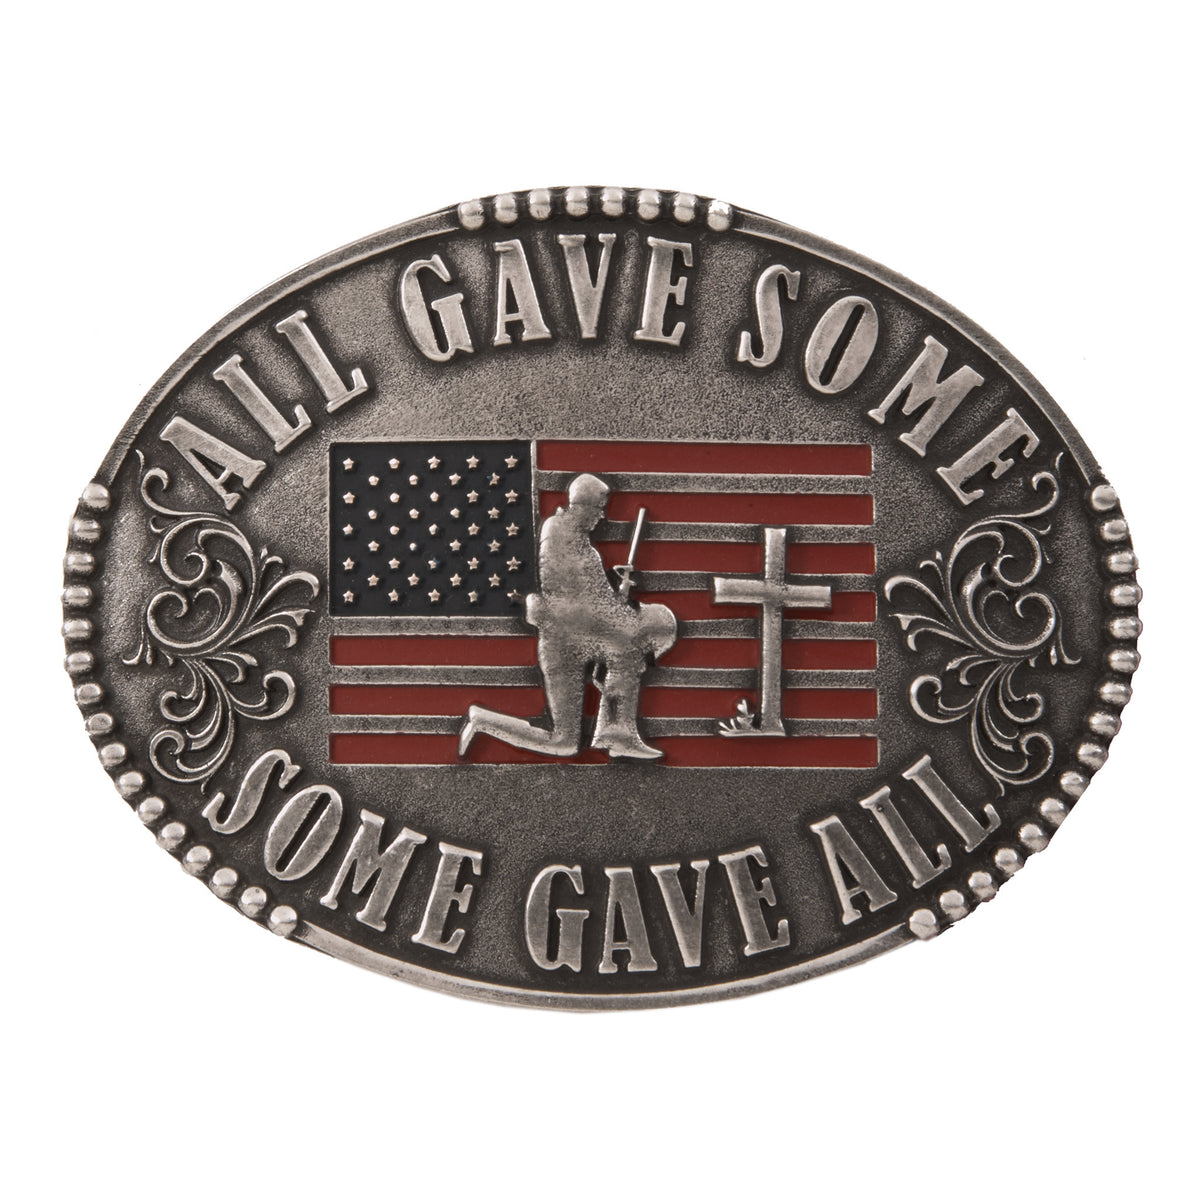 All Gave Some, Some Gave All Buckle